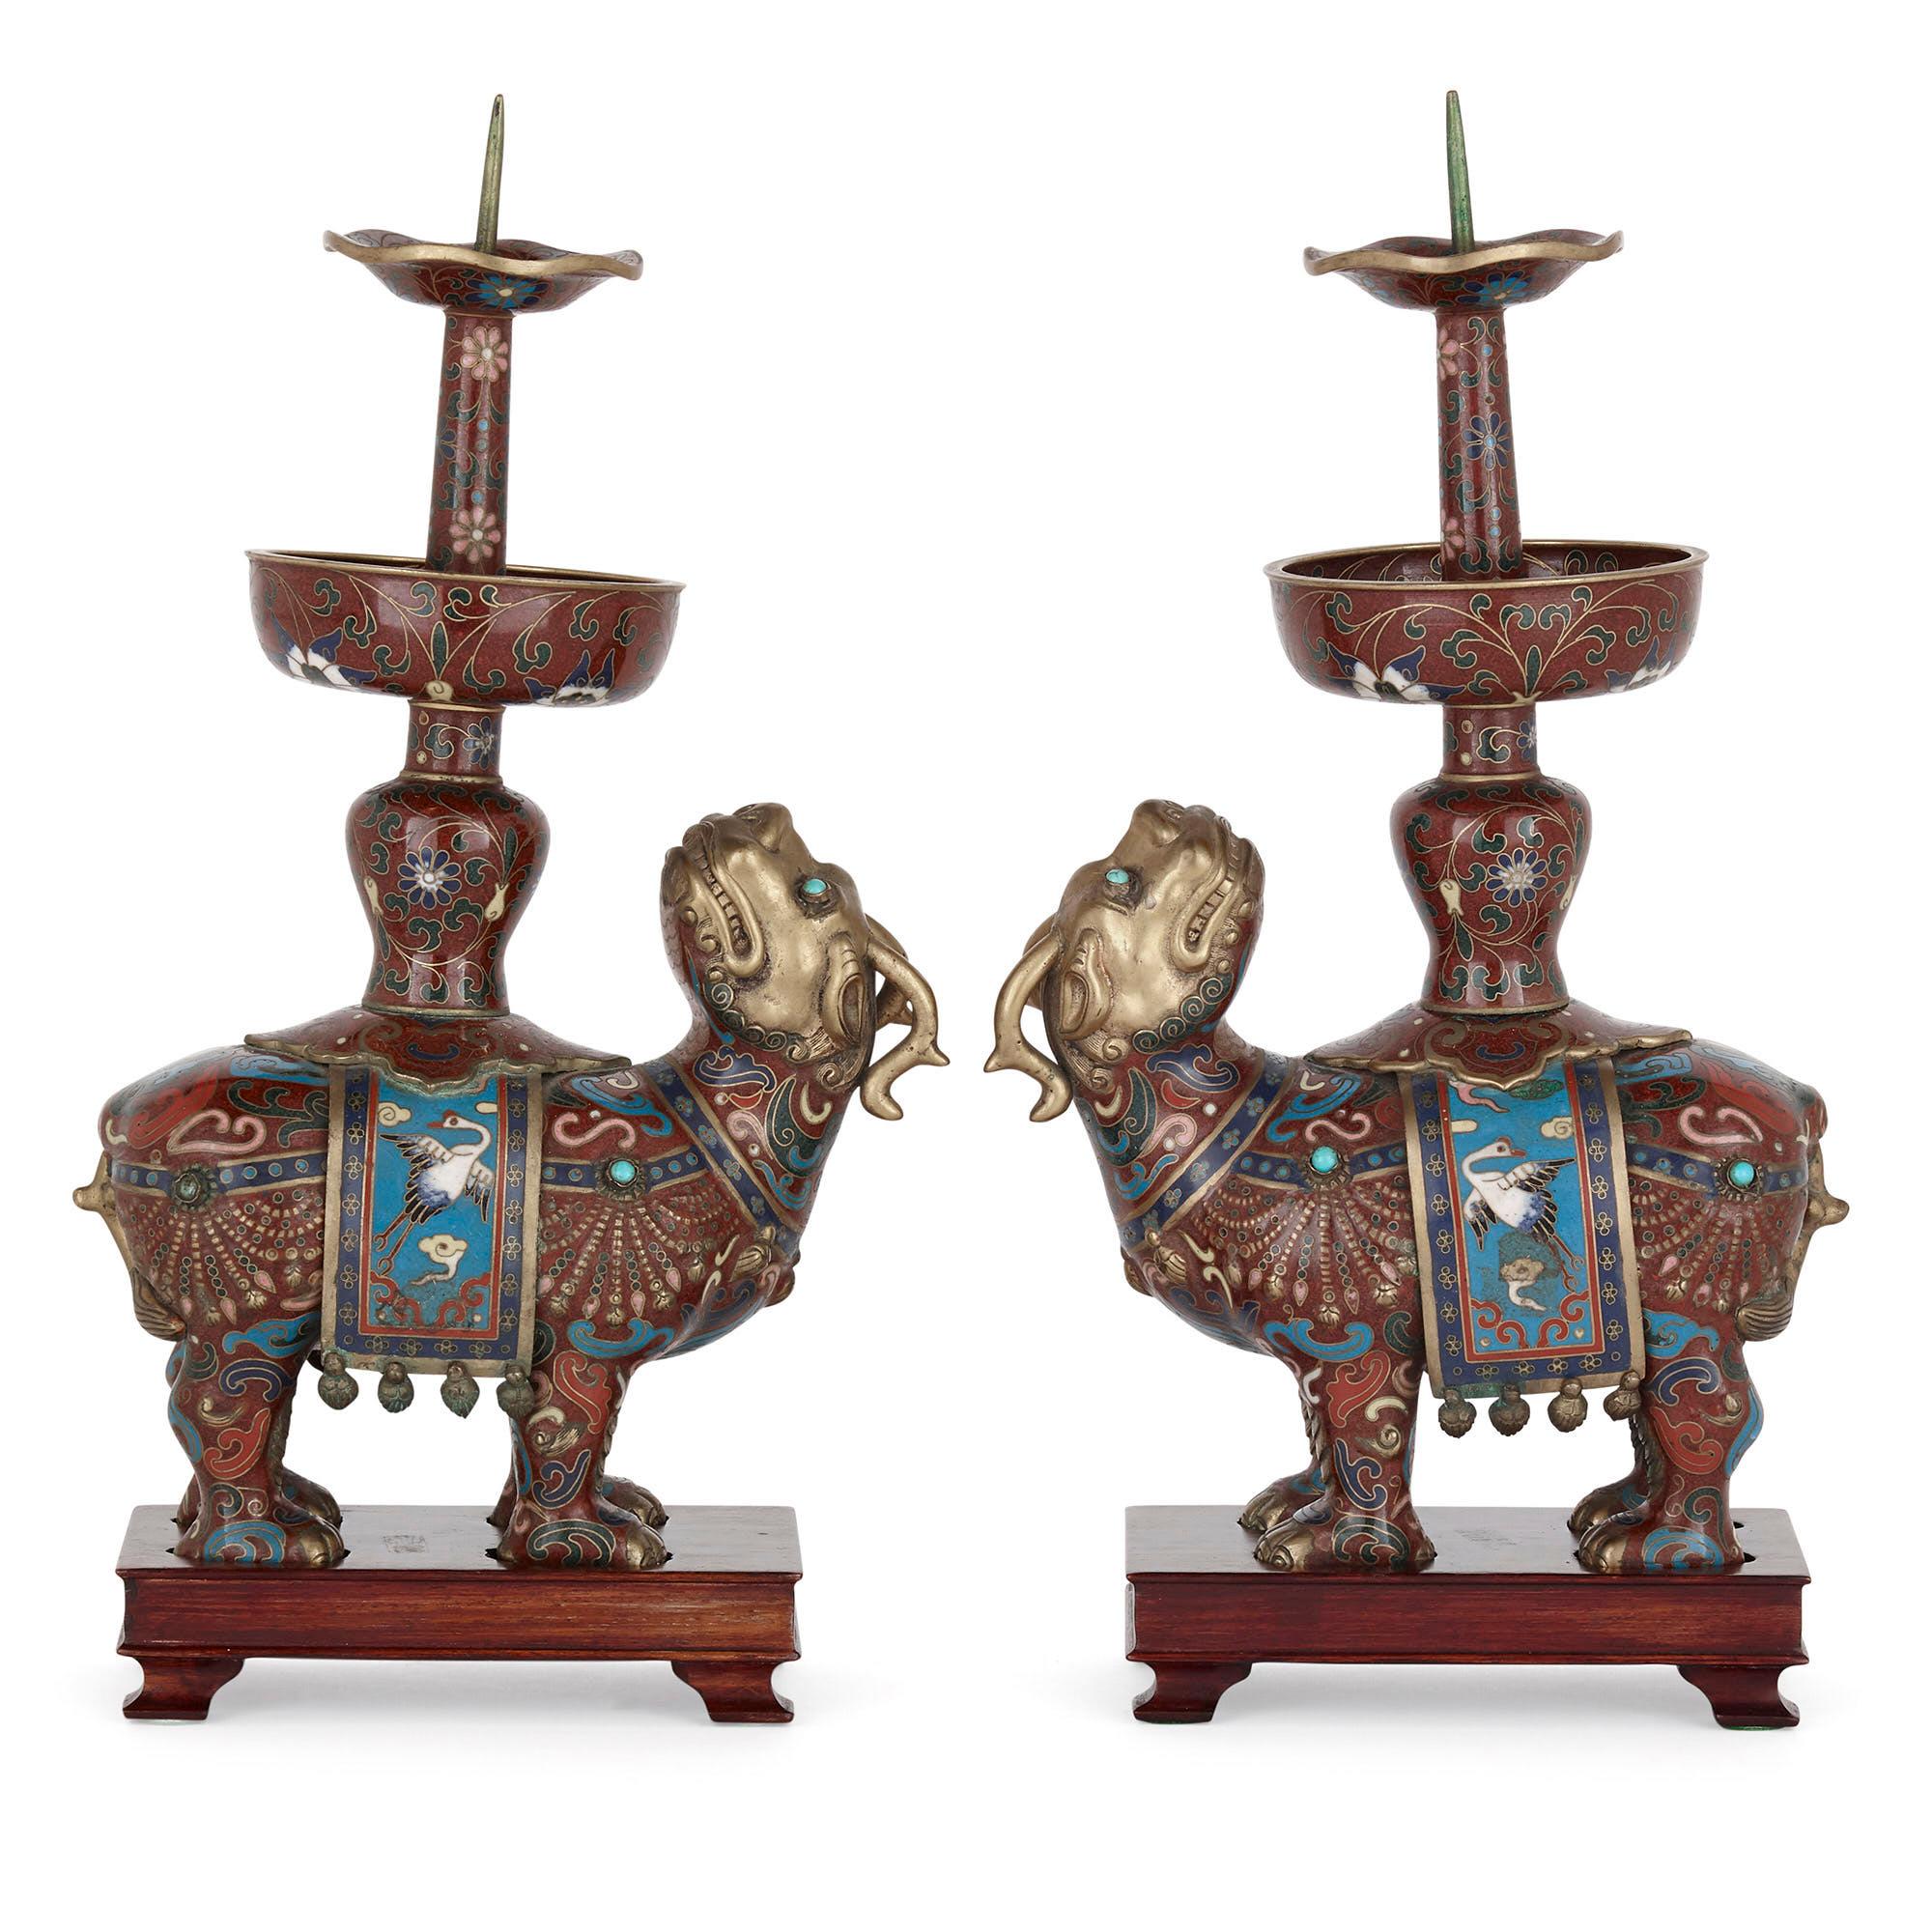 Chinese dragon-form cloisonné enamel candelabra
Chinese, early 20th century
Measures: Height 31cm, width 16cm, depth 19cm

This unusual pair of candelabra, or candlesticks, is a superb example of Chinese decorative art. Each candlestick features